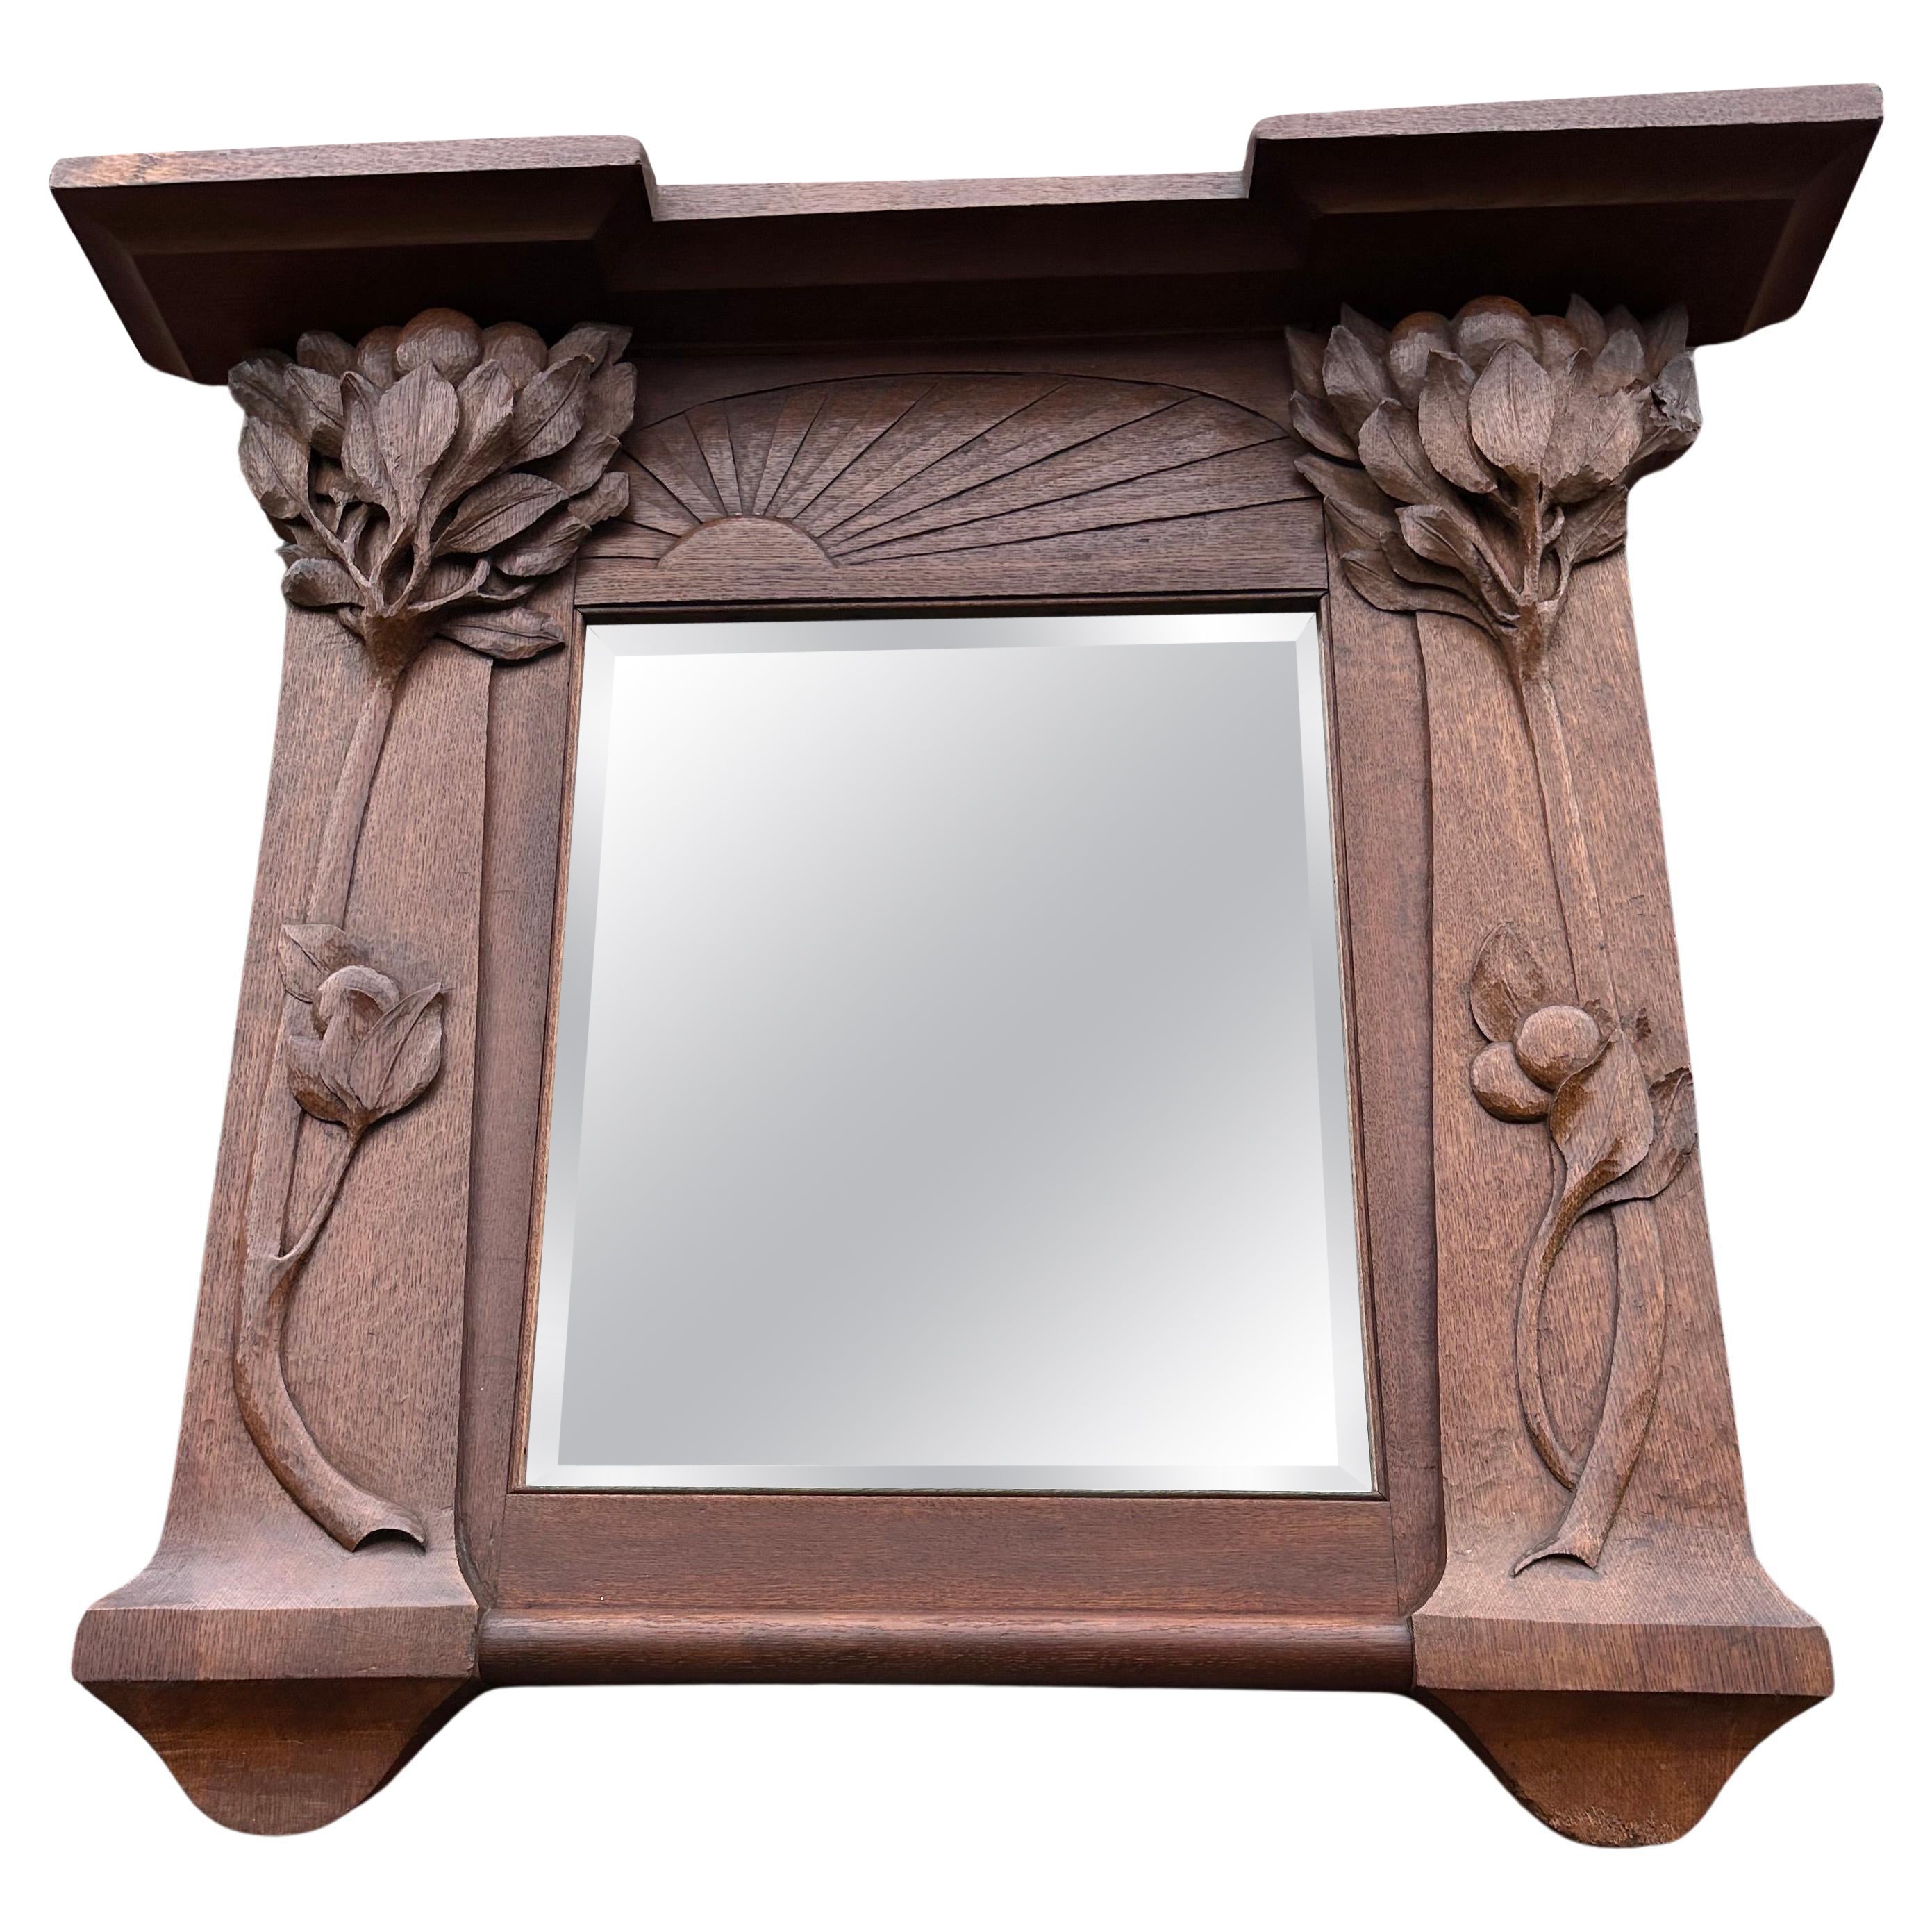  Pure Arts & Crafts Wooden Wall / Fireplace Mirror w. Amazing Hand Carved Plants For Sale